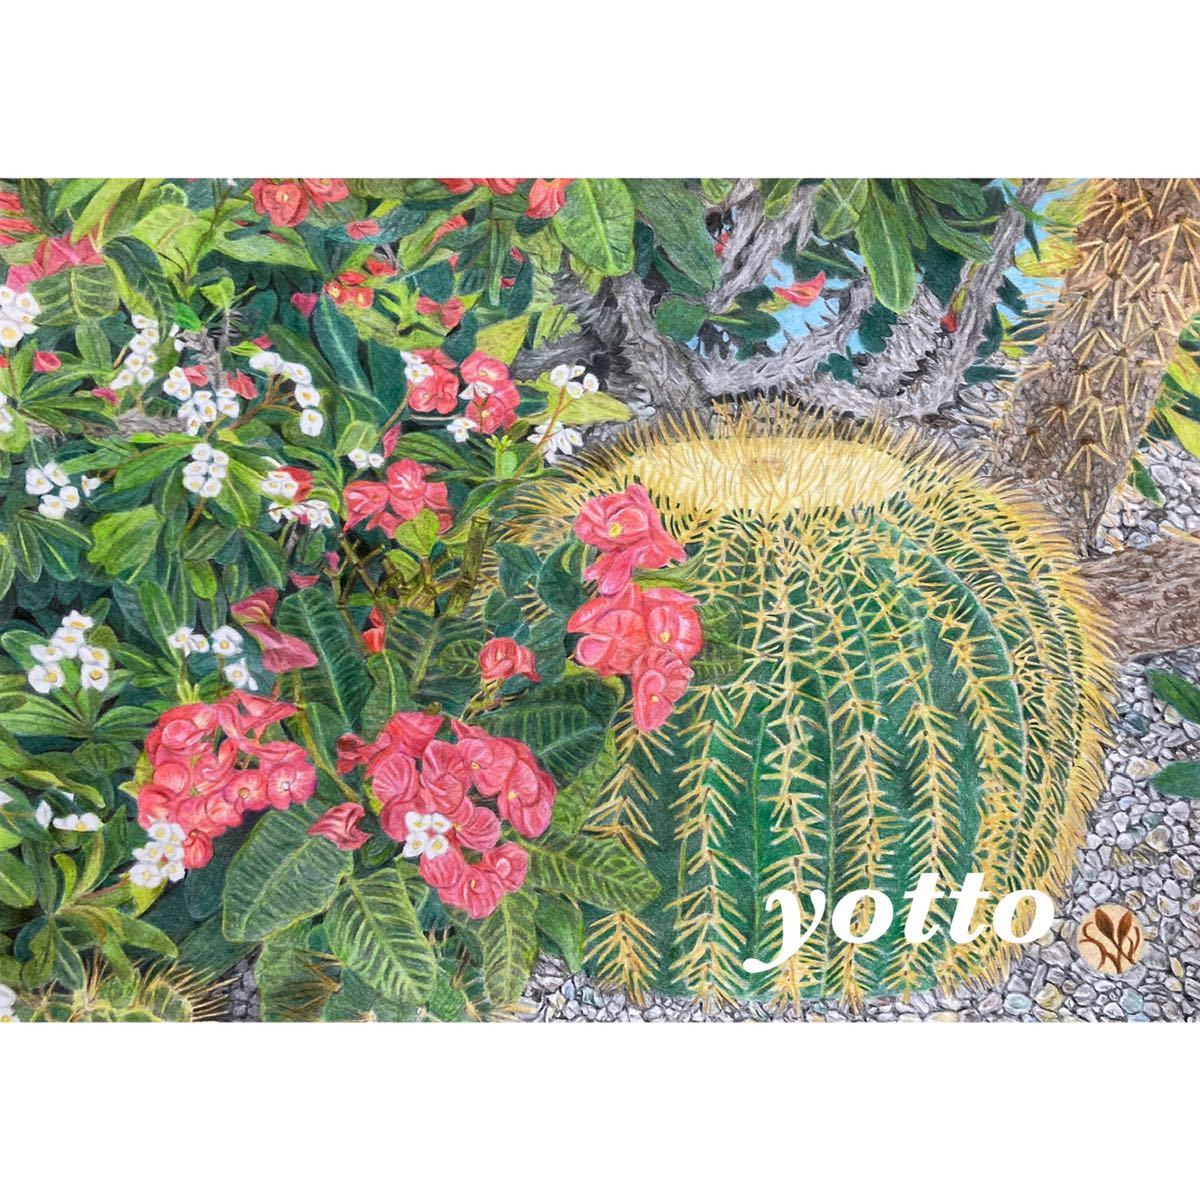 Colored pencil drawing Cactus and Flower Kirin A4 size with frame ◇ ◆ Hand-drawn ◆ Yotto ◇, artwork, painting, pencil drawing, charcoal drawing